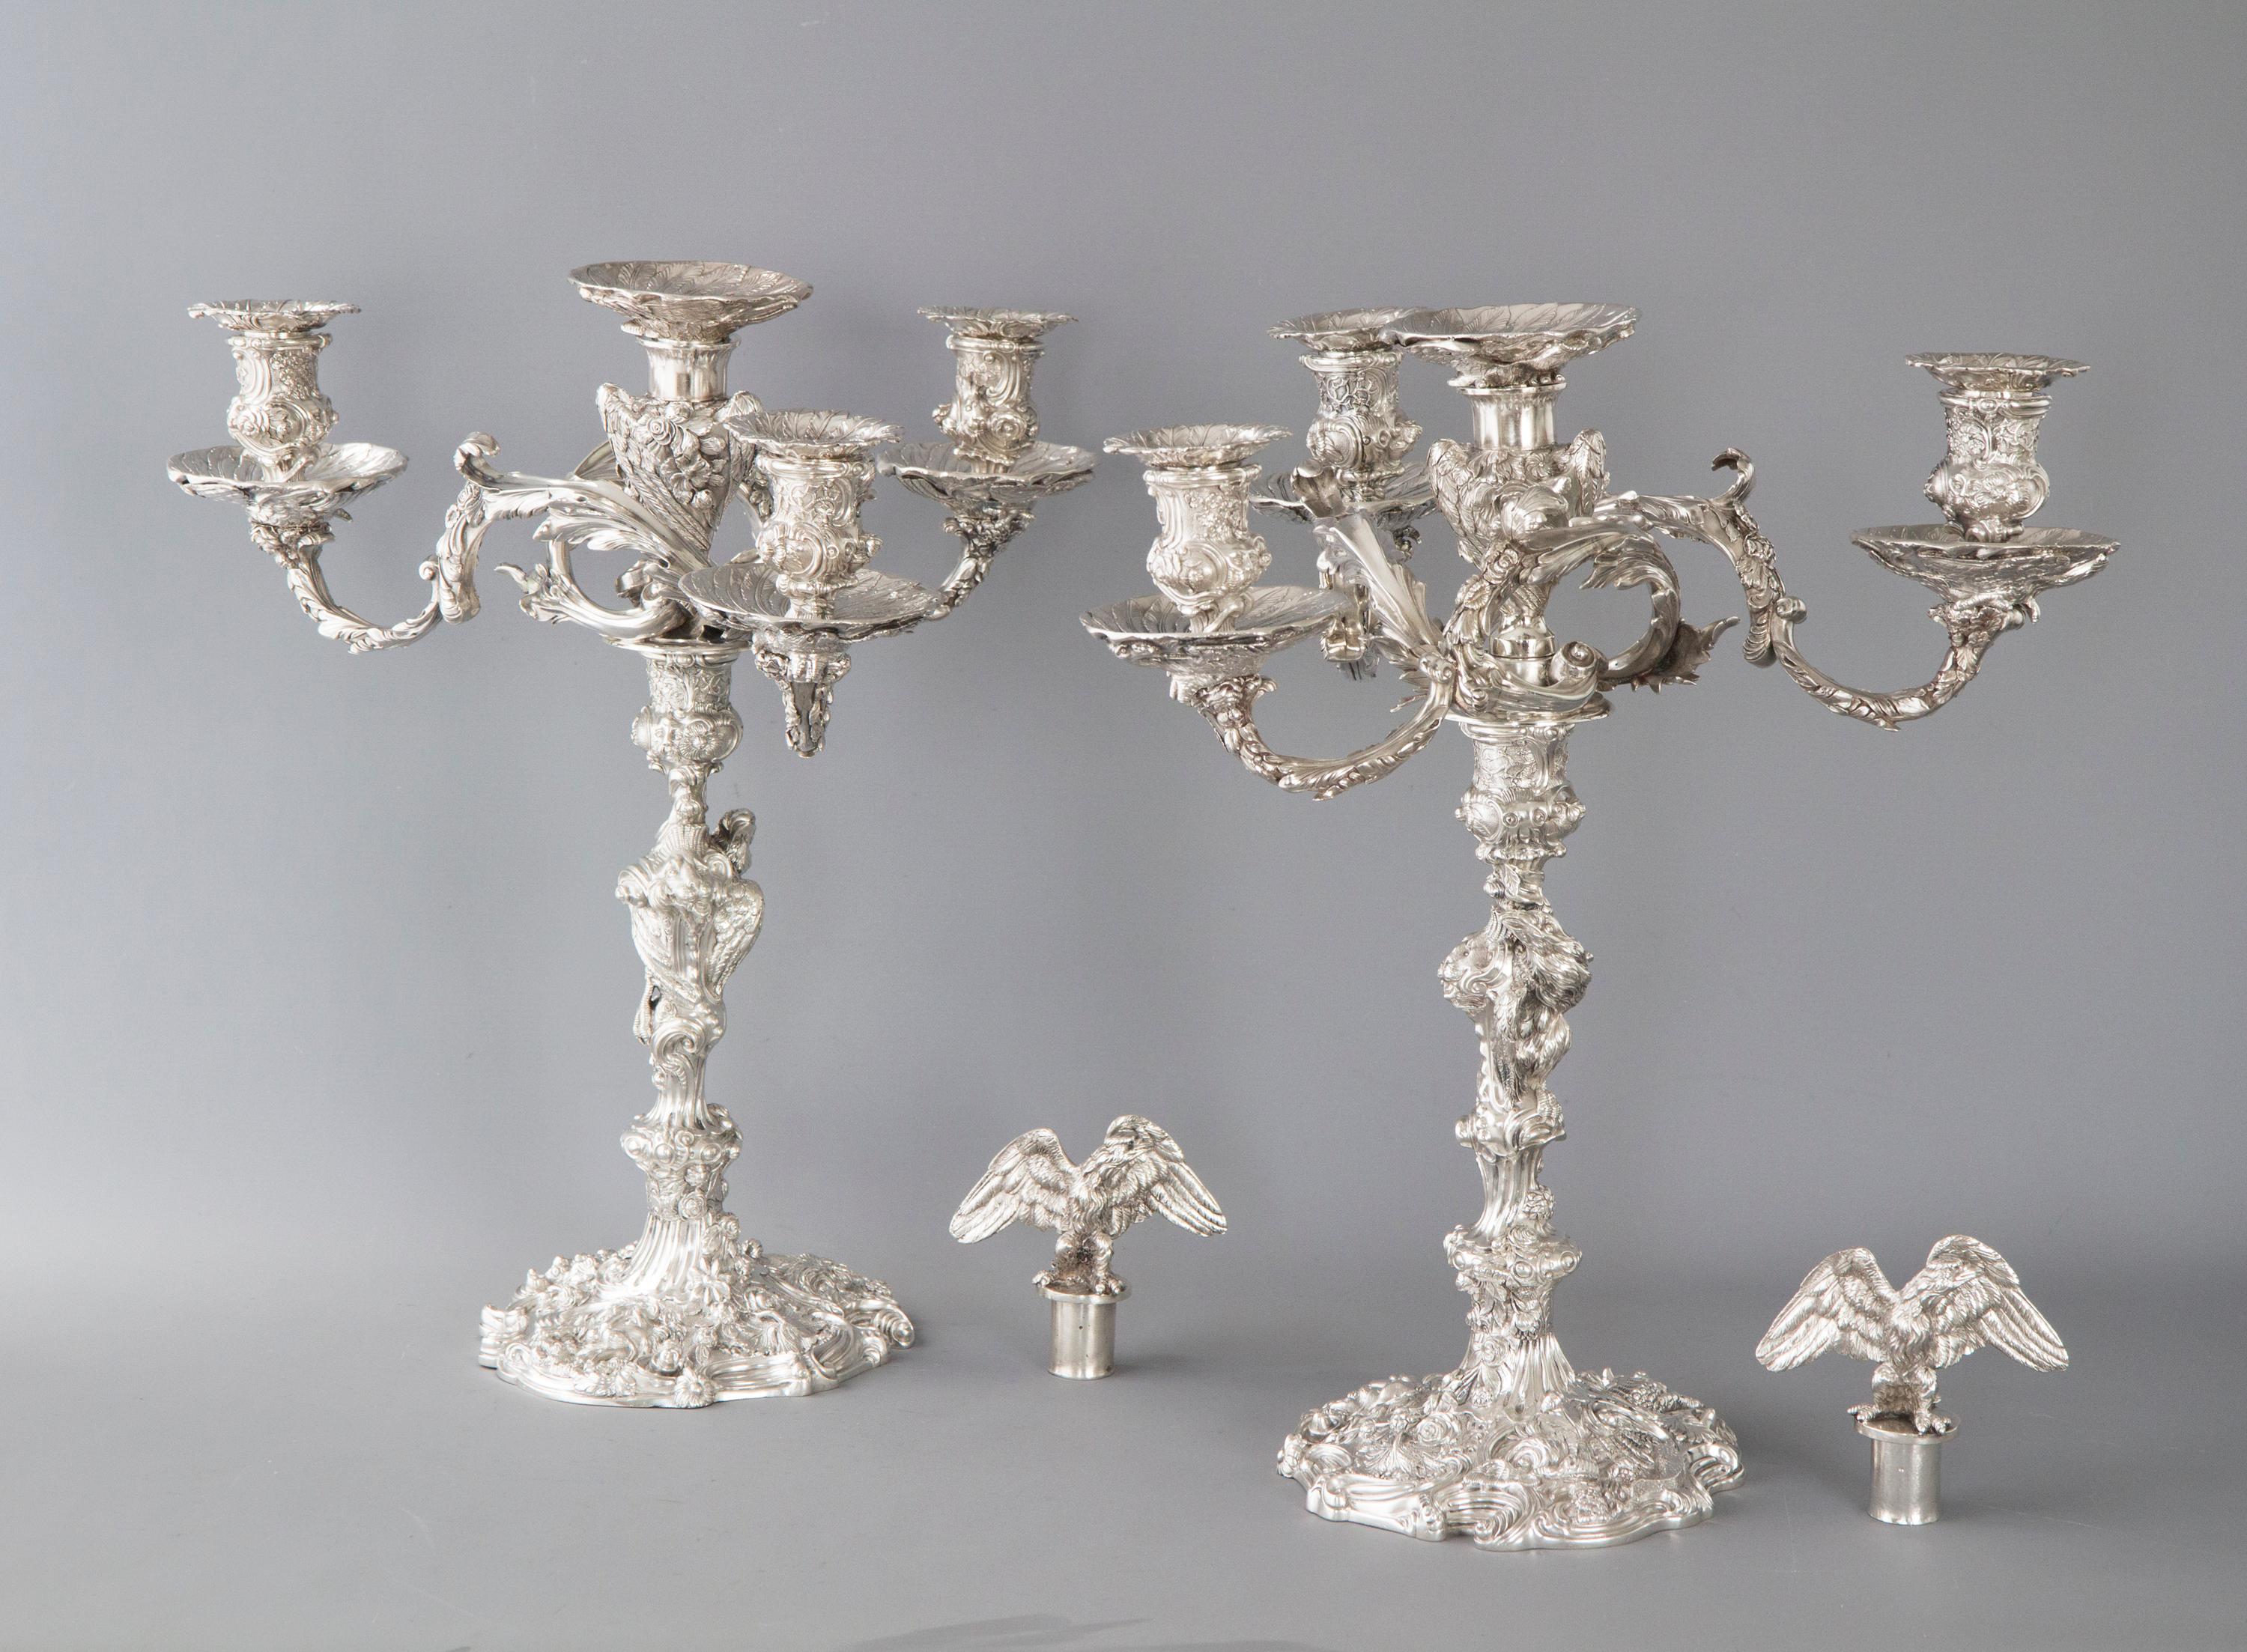 An outstanding and finely cast pair of George III silver candelabra modeled in the neo-rococo style. Each standing on a shaped circular base rising to a knopped baluster stick. The removable arms with three scrolling foliate branches leading to